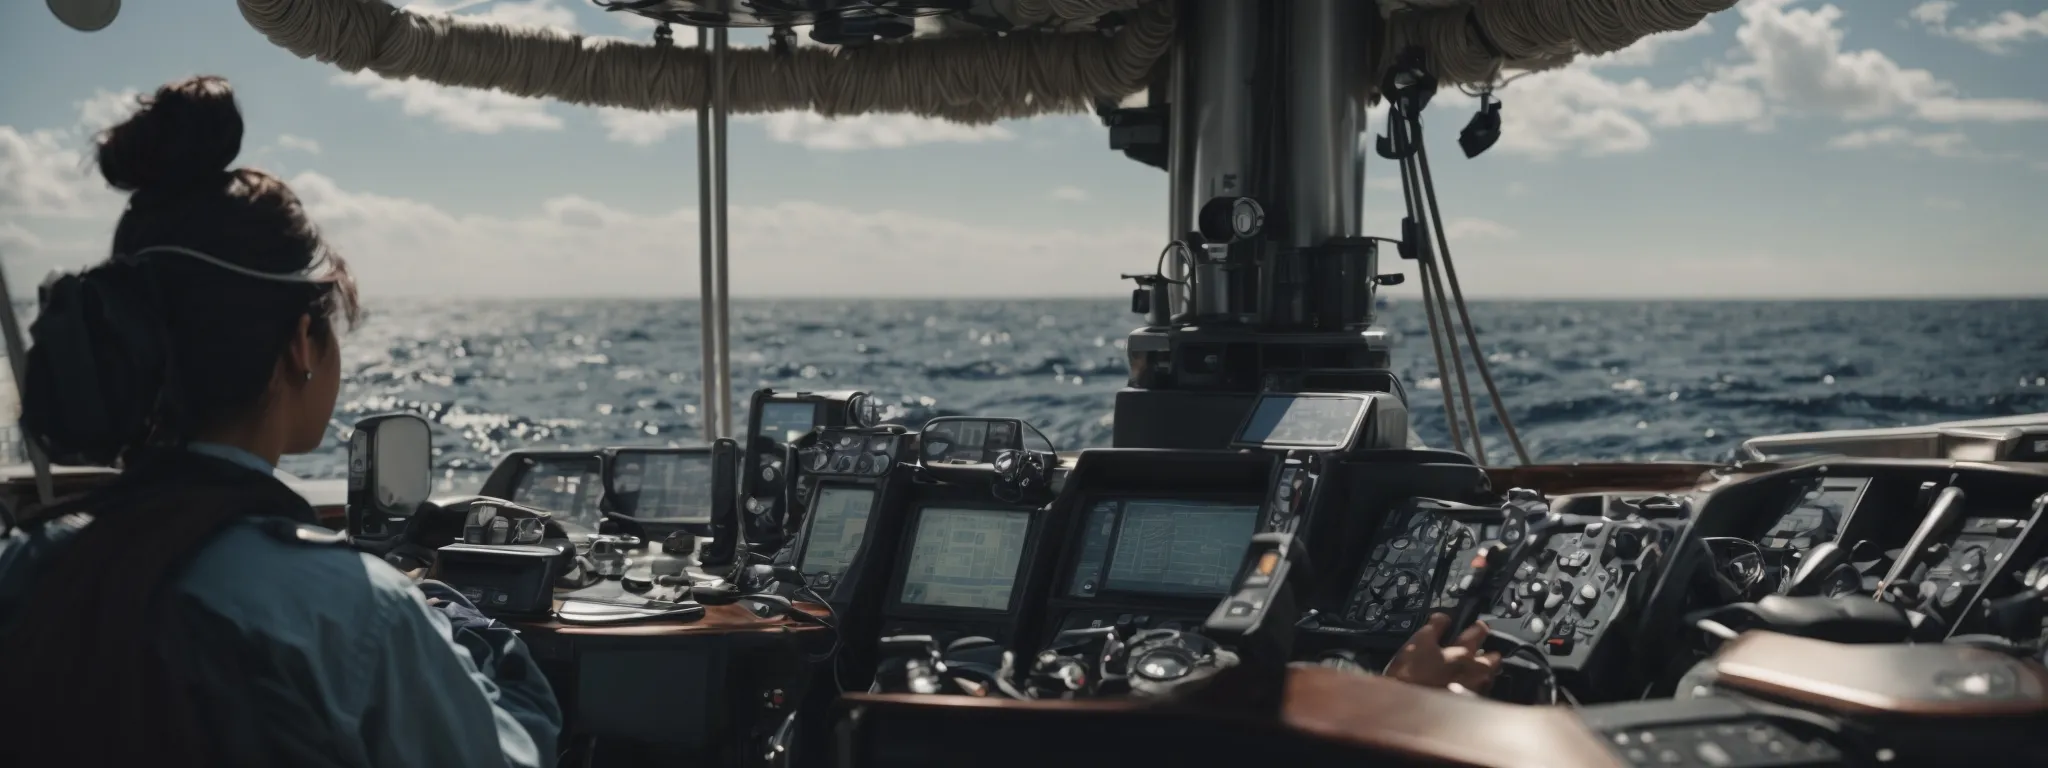 a figure stands at the helm of a ship, navigating through a sea of digital devices under a clear sky.